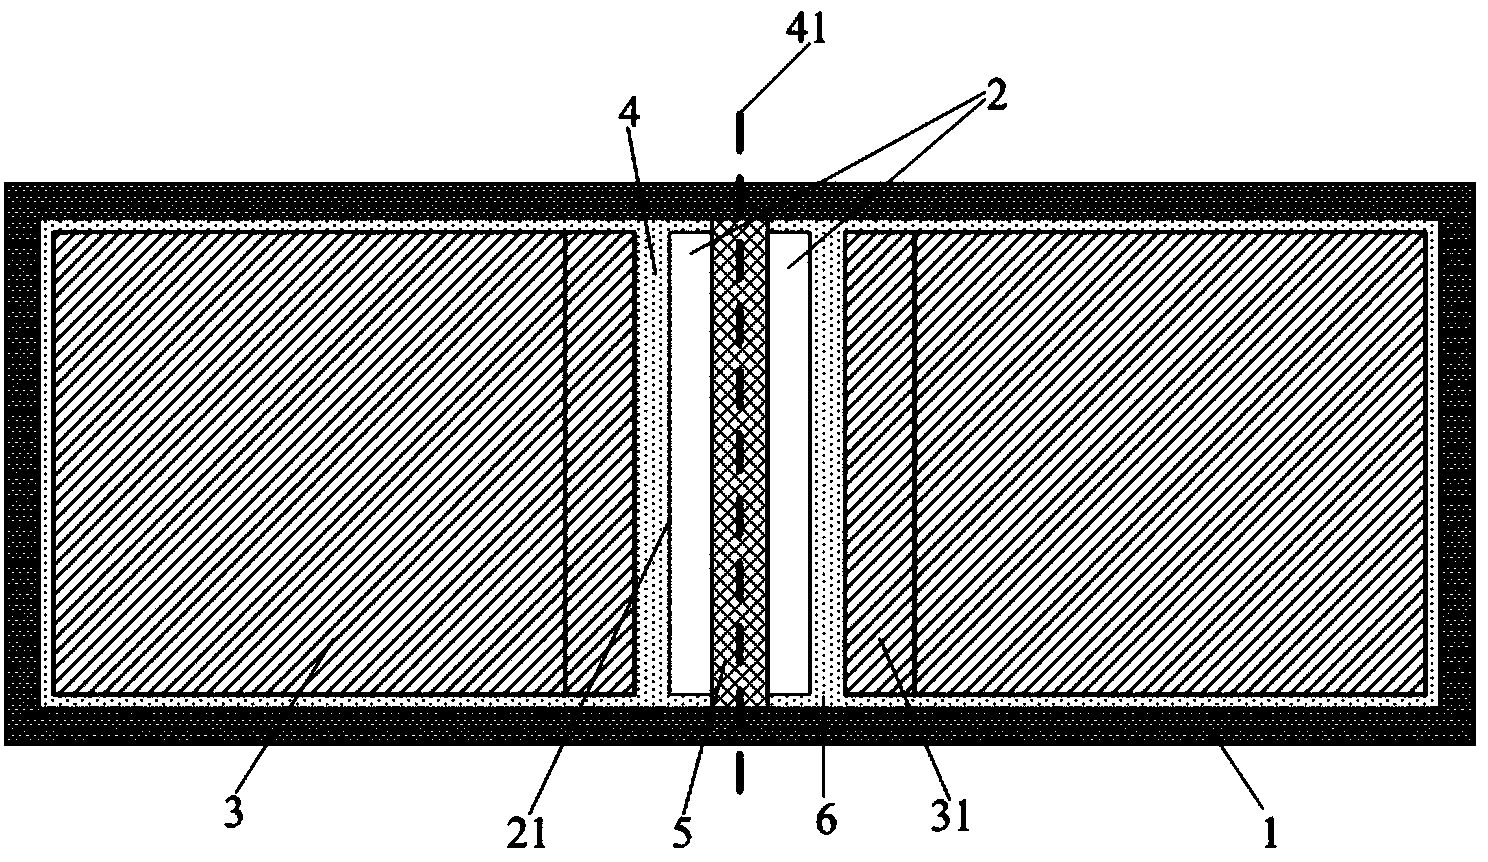 Backlight and display device